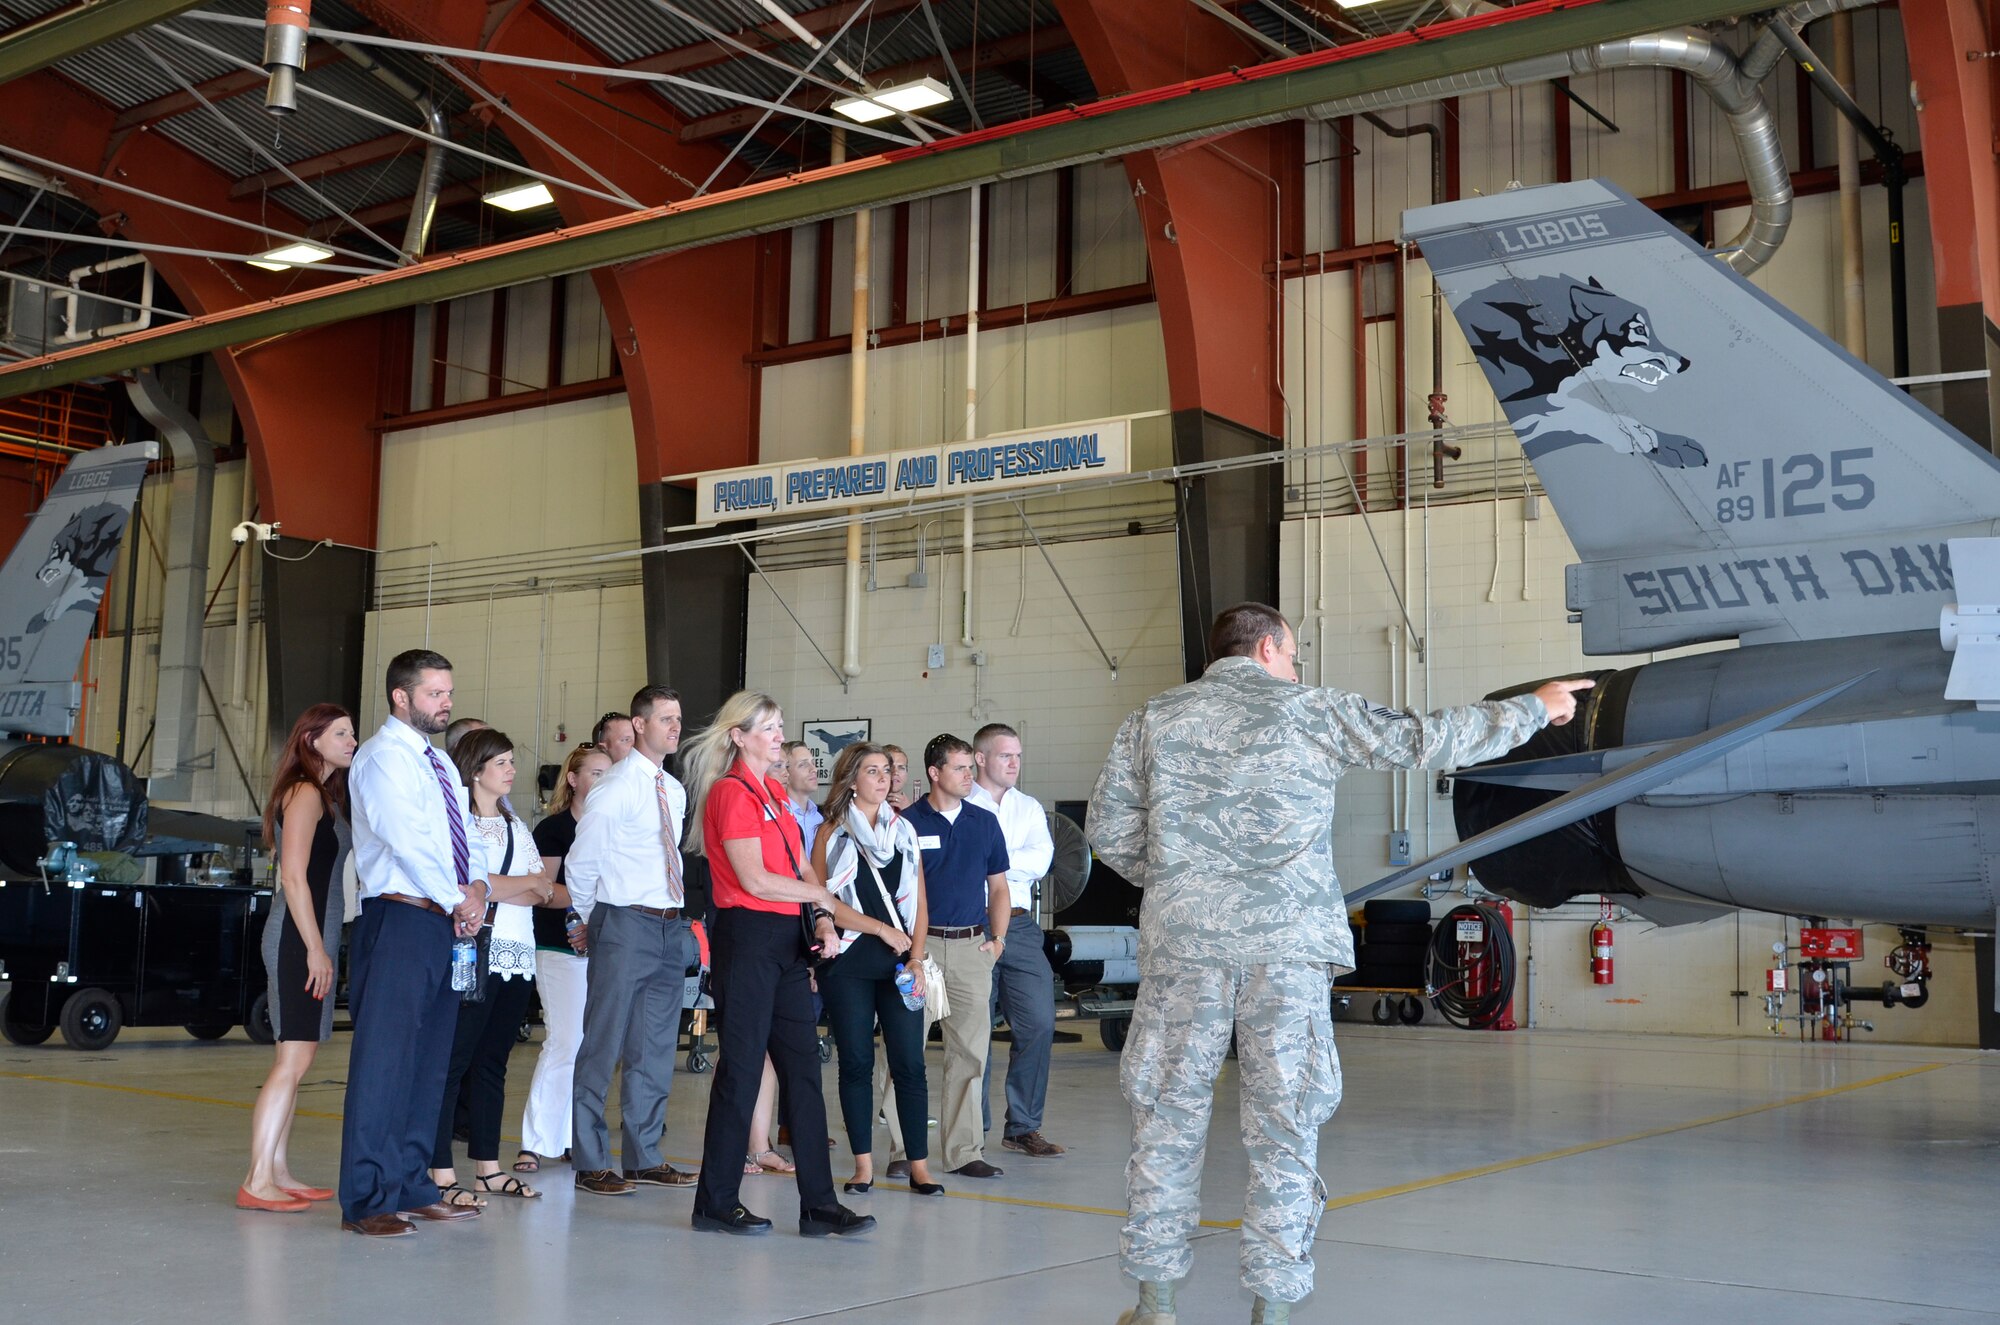 SIOUX FALLS, S.D. - Master Sgt. Chris Portice, 114th Maintenance Squadron avionics technician, explains to members of the Sioux Falls Area Chamber of Commerce Young Professionals Network what his position at the South Dakota Air National Guard includes during a tour given at Joe Foss Field, S.D. on July 13, 2016.(U.S. Air National Guard photo by Maj. Travis Schuring/released)